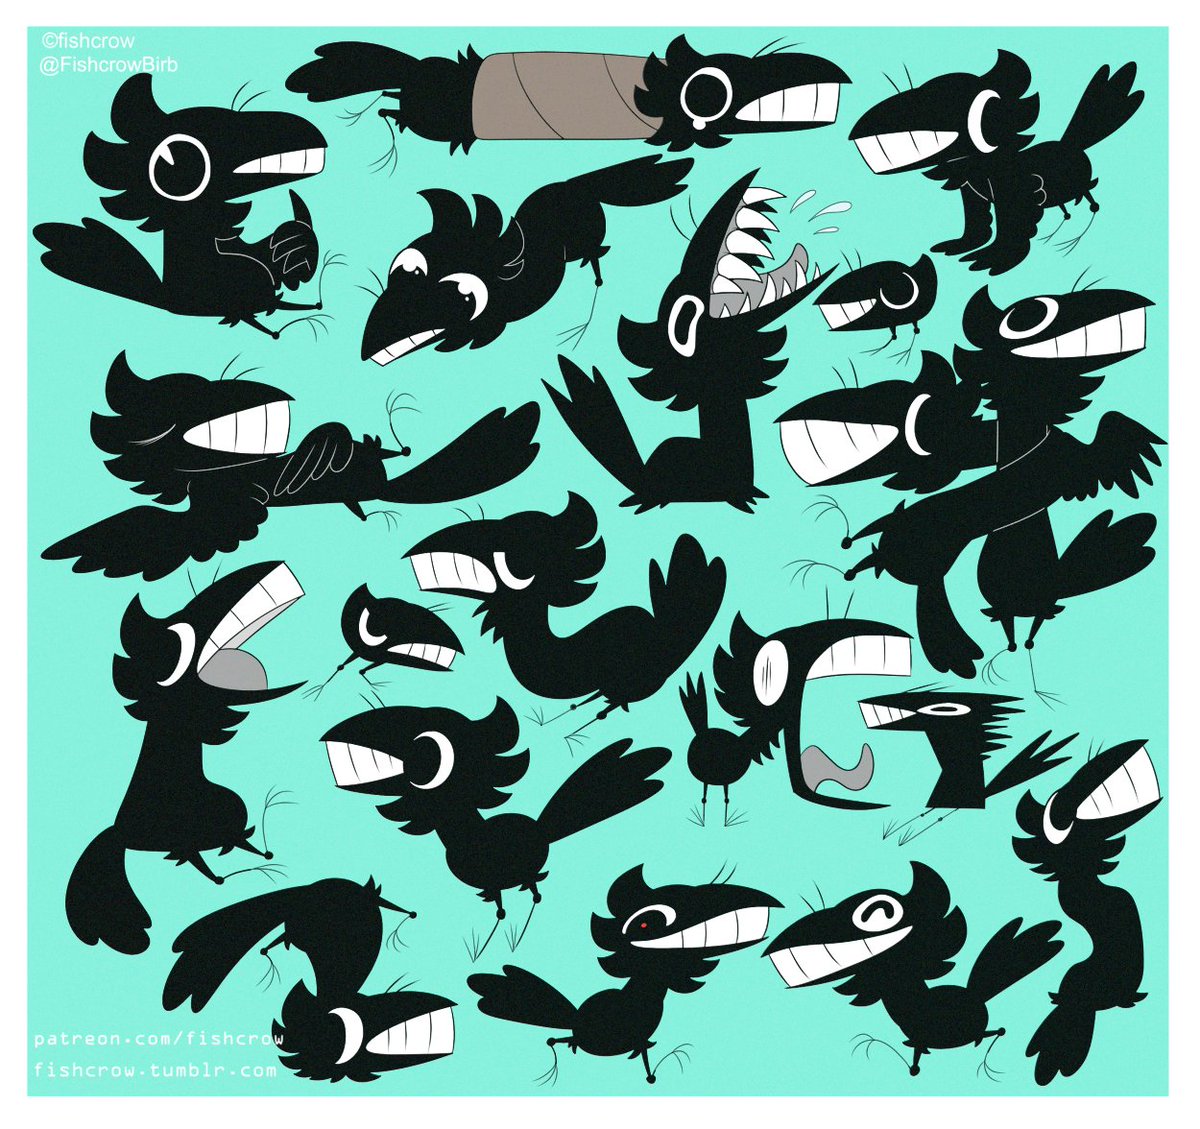 Many, many fishcrows! Which one is your fav? :>